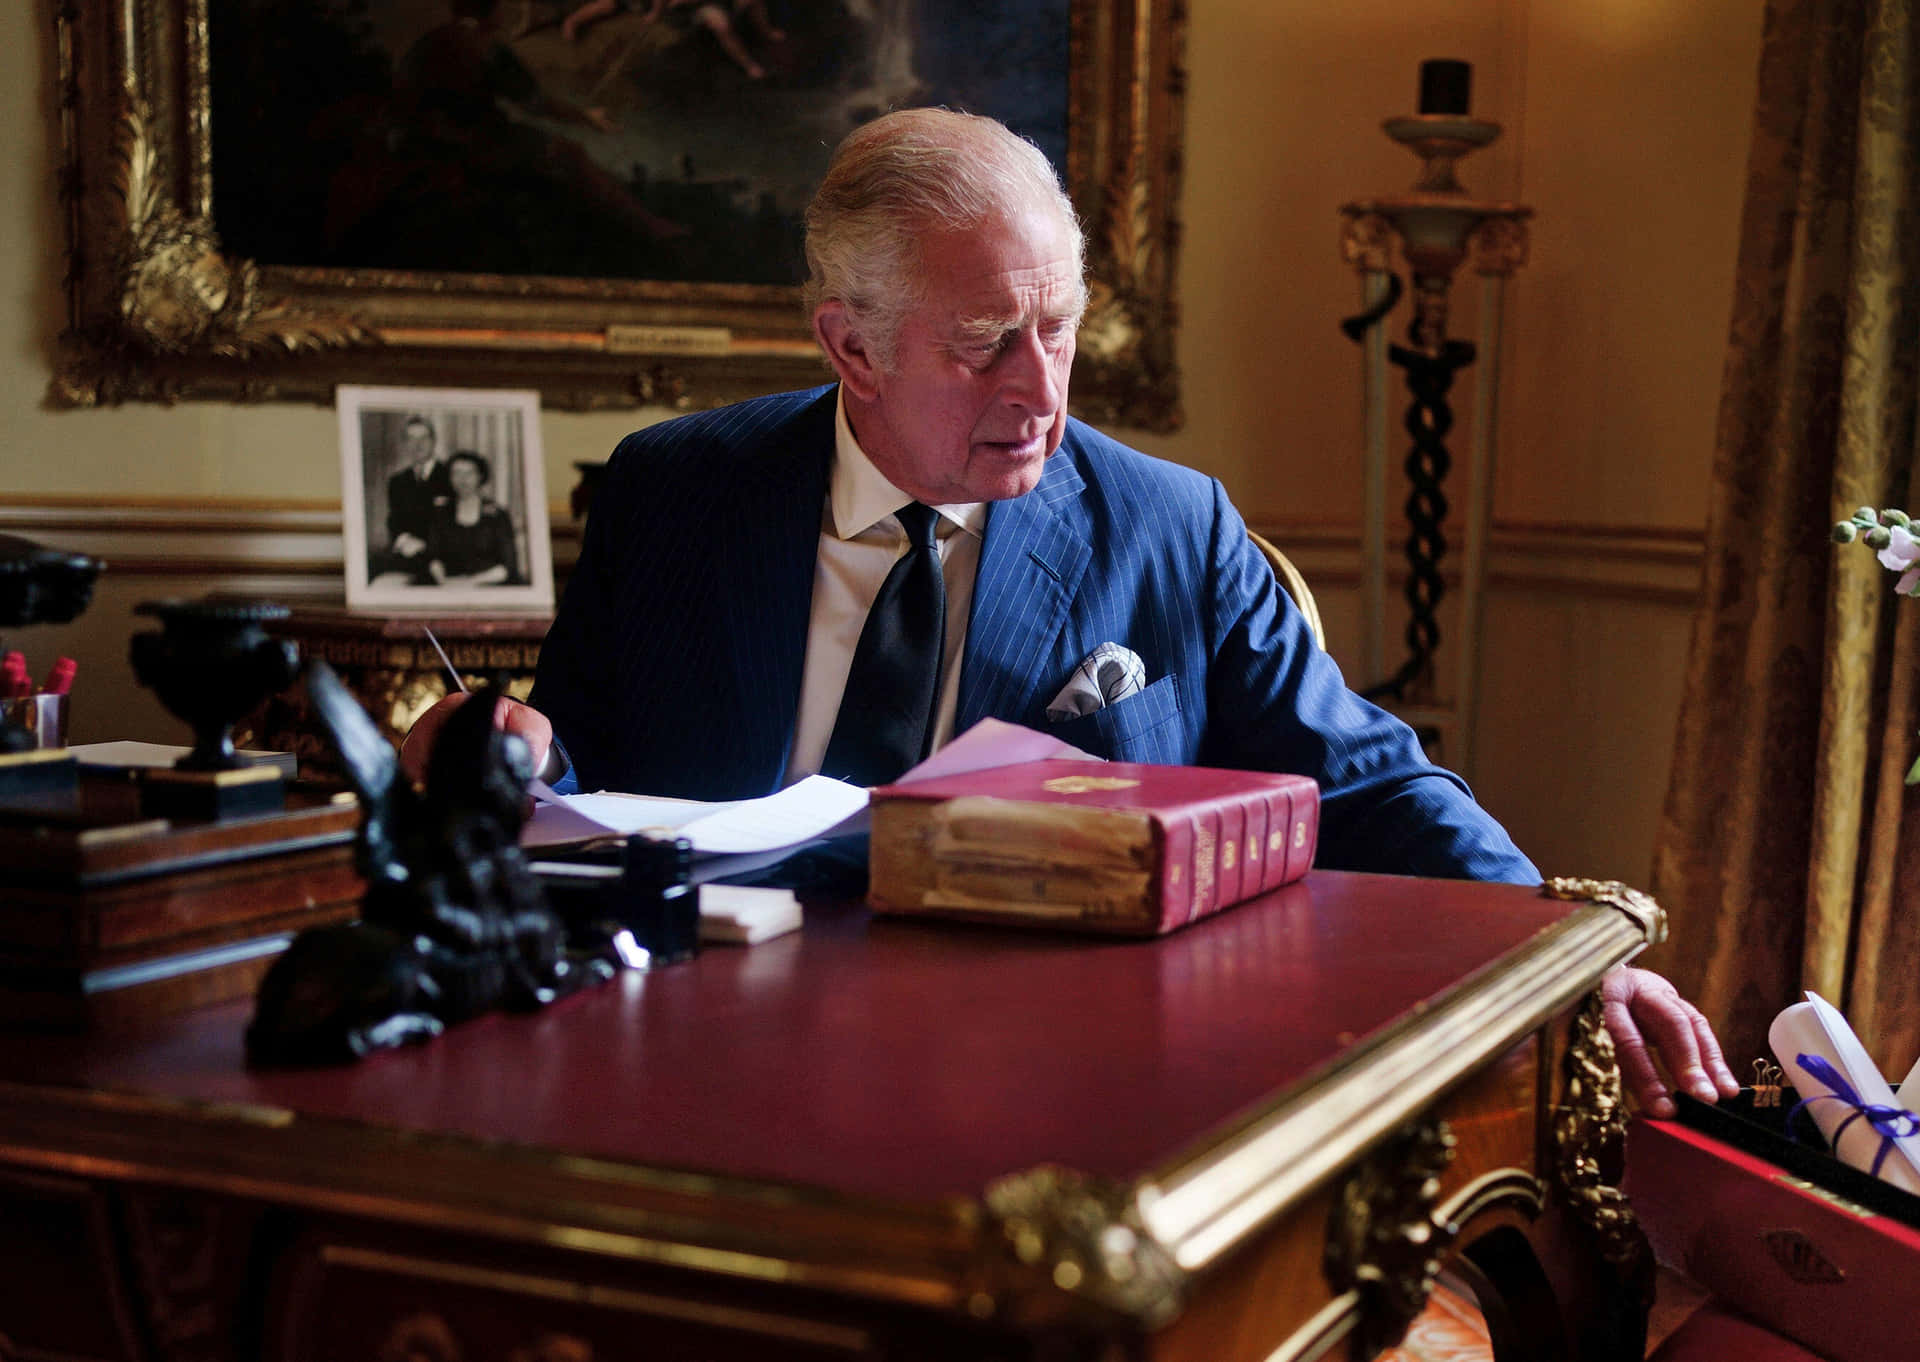 King Charles Iii Signing Papers Wallpaper